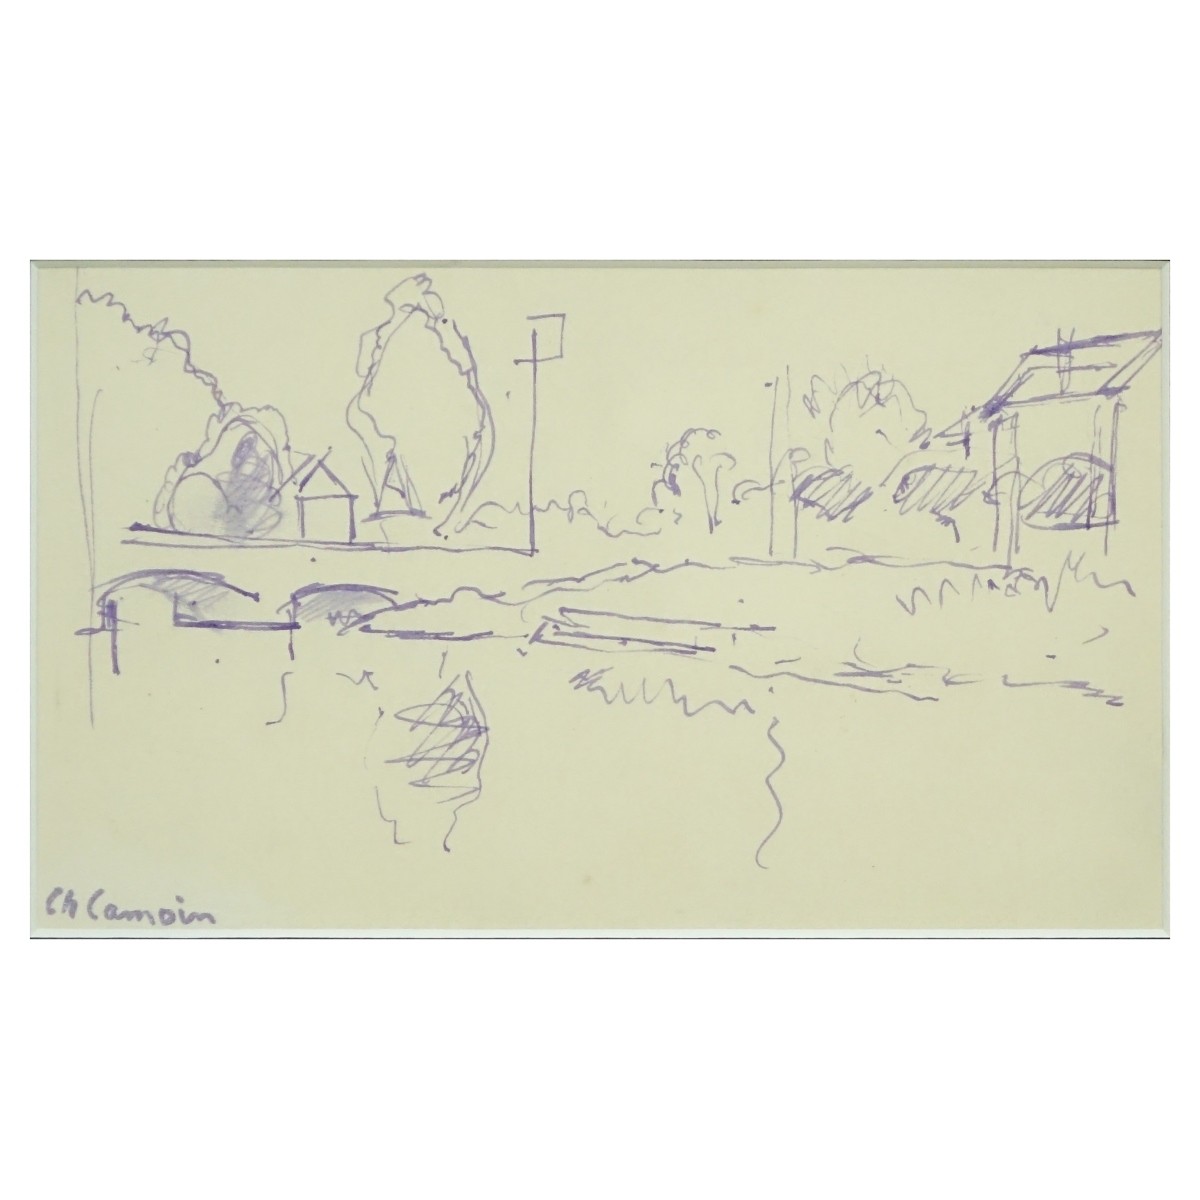 Attributed to: Charles Camoin Ink Drawing